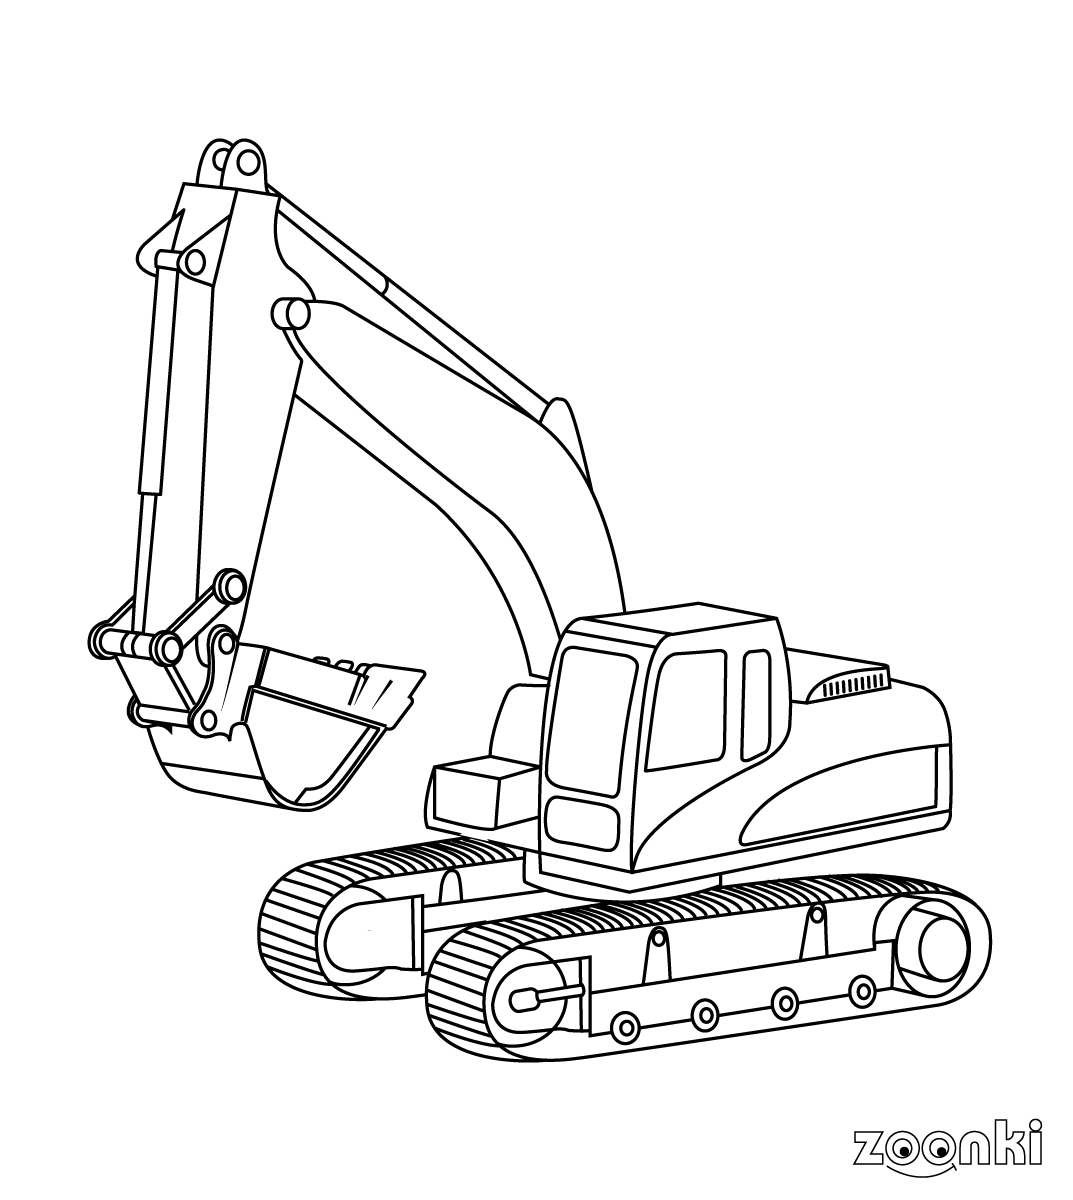 Colouring pages for kids   Construction   zoonki.com